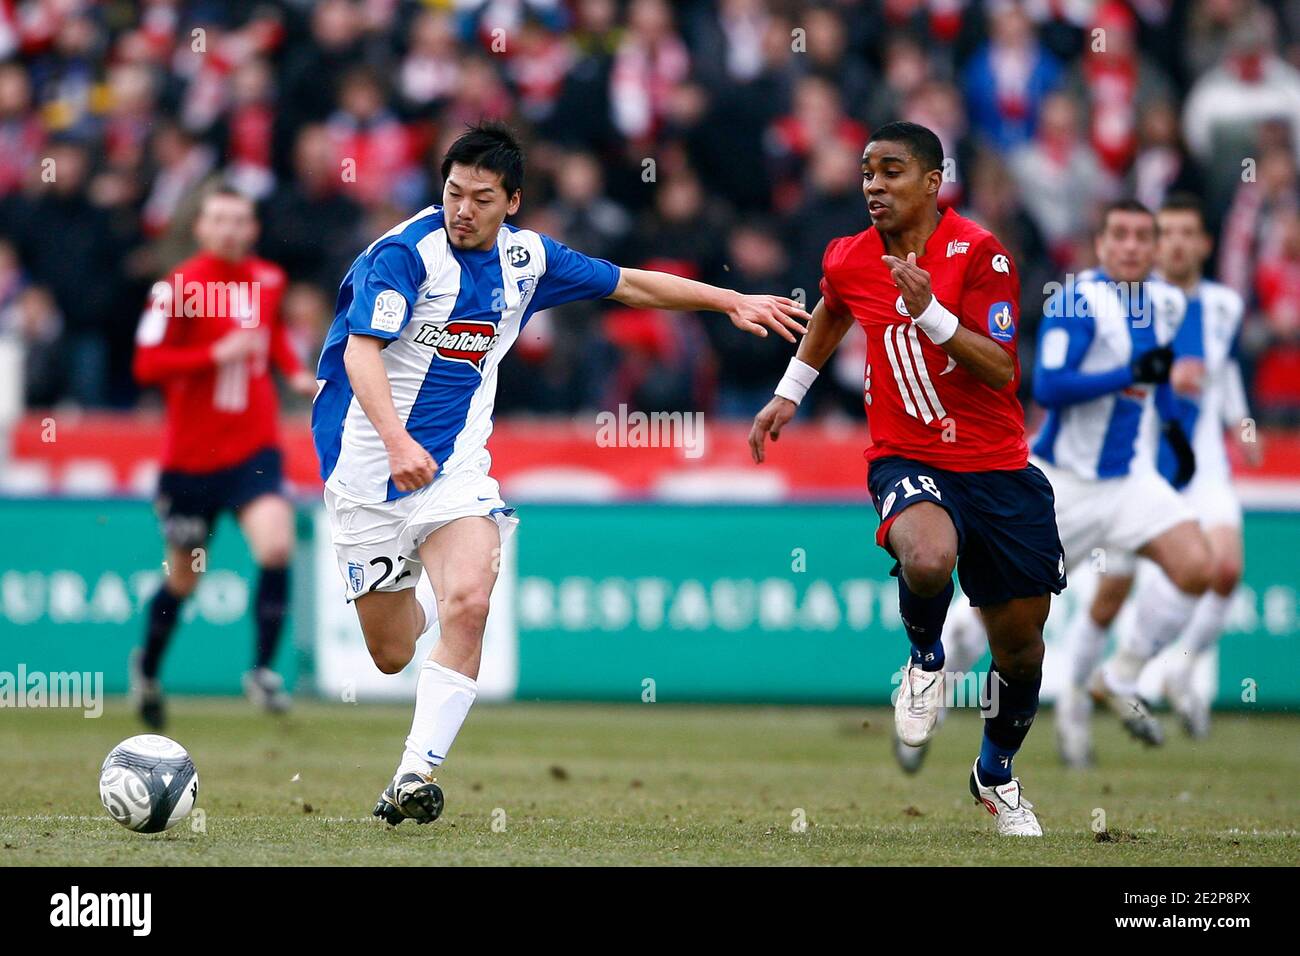 Lille's Franck Beria fights for the ball with Grenoble's Matsui during the French First League soccer match, Lille OSC vs Grenoble F38 at Lille Metropole Stadium in Lille, France on March 14, 2010. Lille won 1-0. Photo by Mikael LIbert/ABACAPRESS.COM Stock Photo